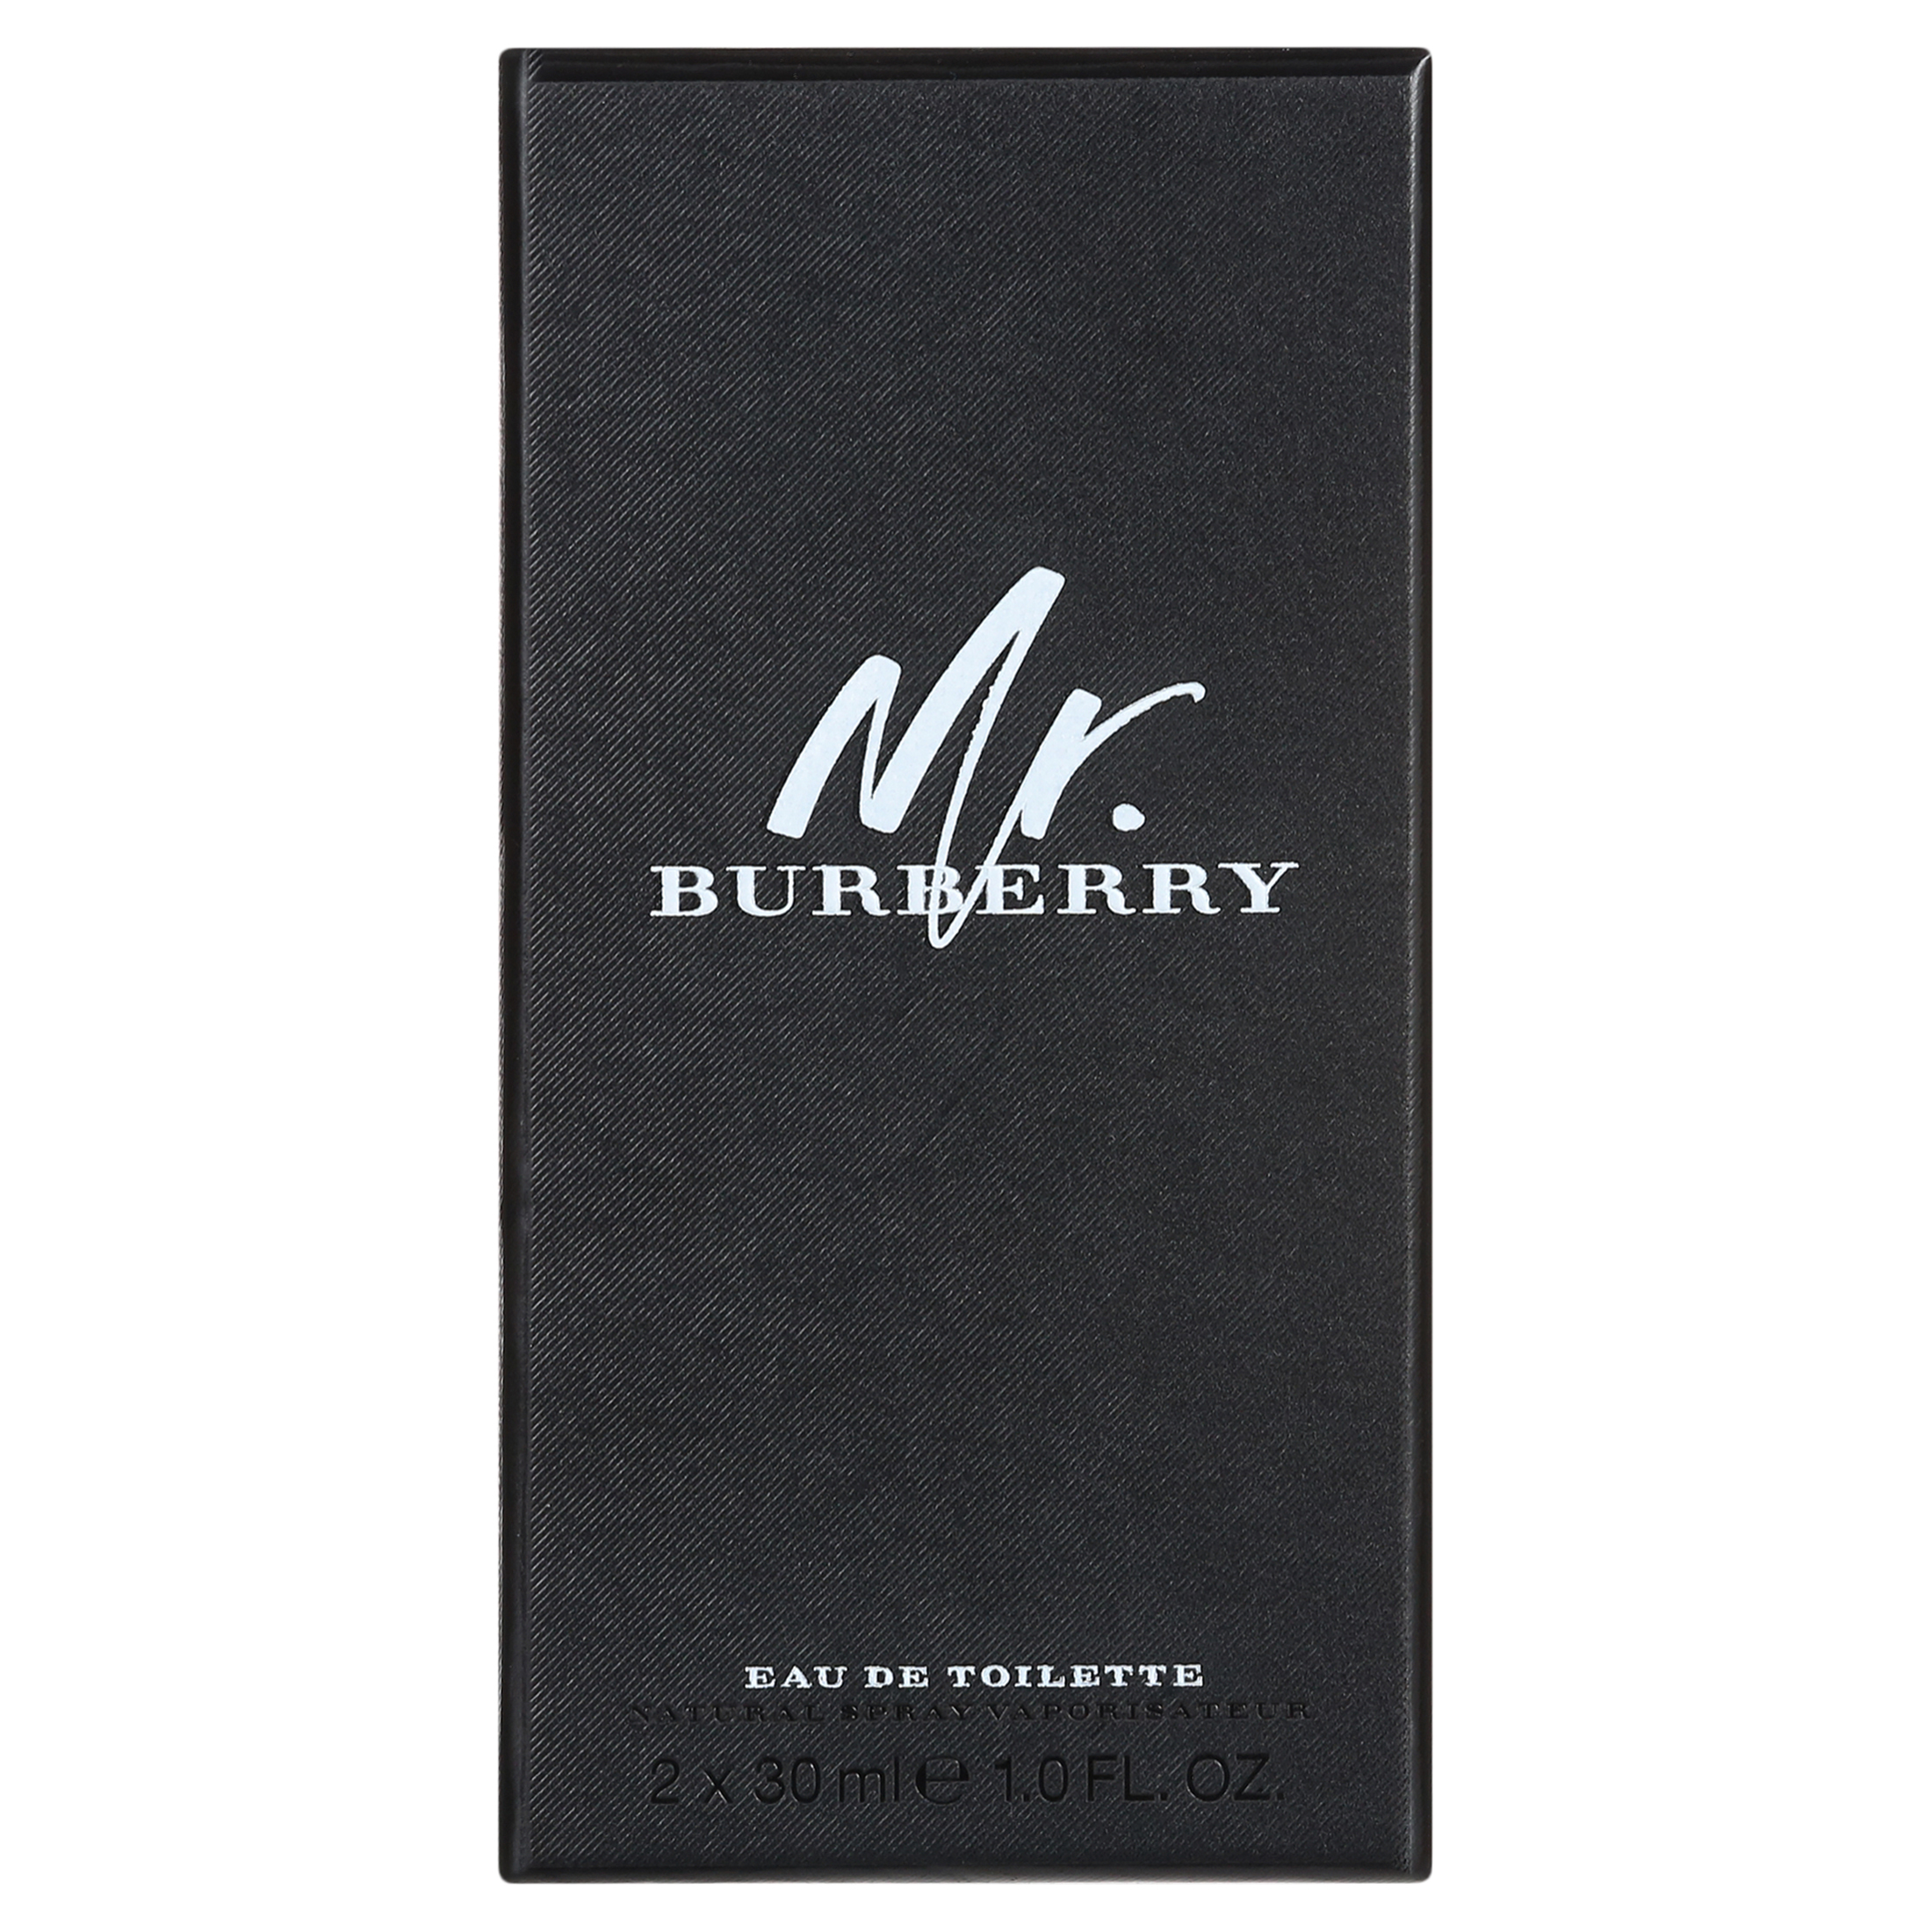 Burberry Travel Set Mini & Travel Size Cologne for Men, 2 Pieces - image 2 of 6